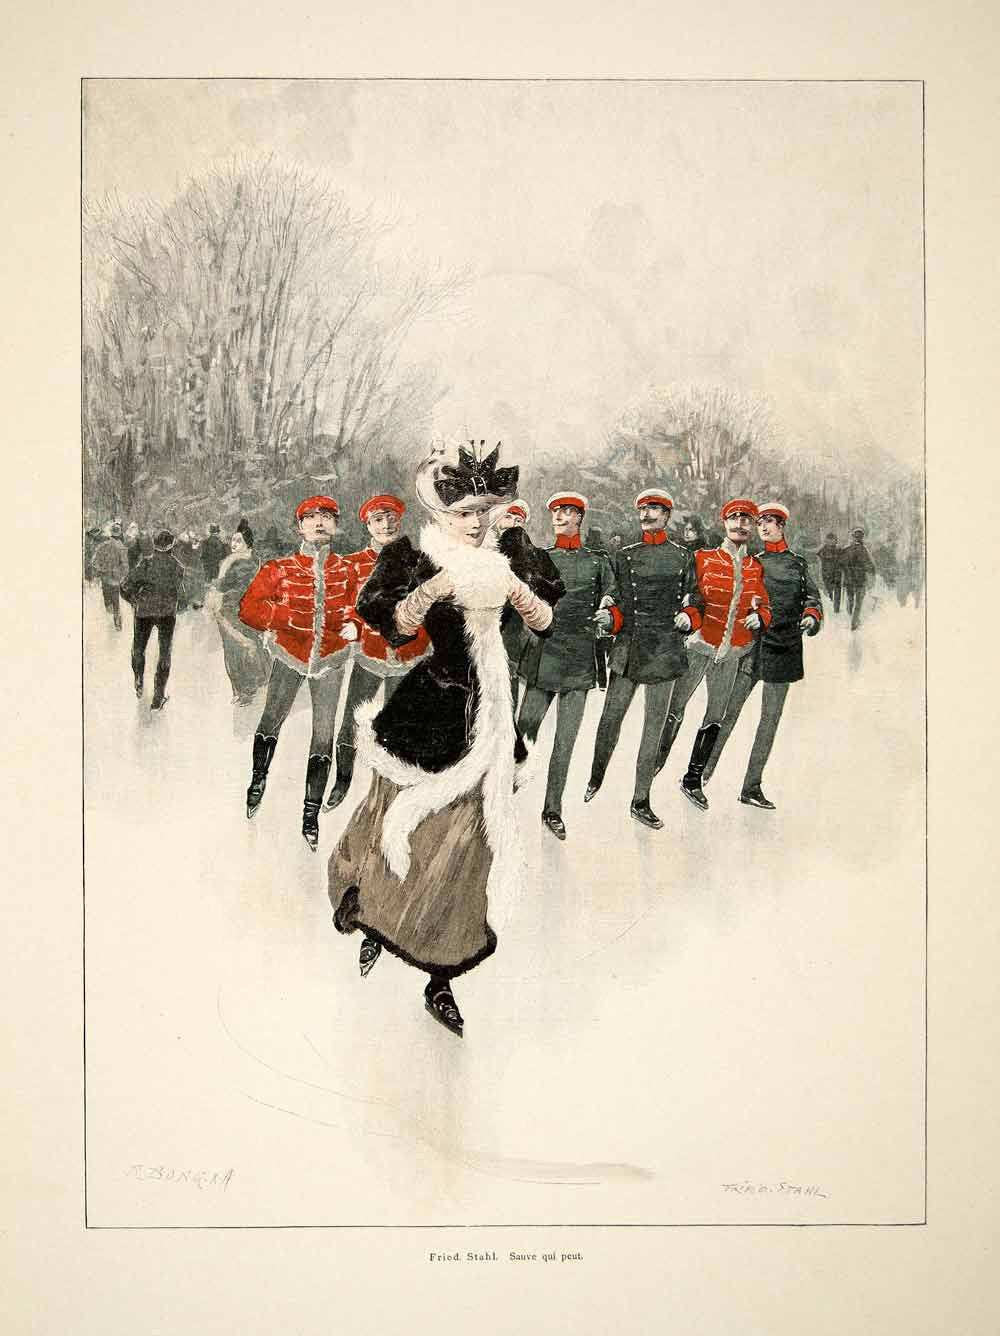 1893 Wood Engraving Fried Stahl Ice Skating Soldier Victorian Woman Muff MK1 - Period Paper
